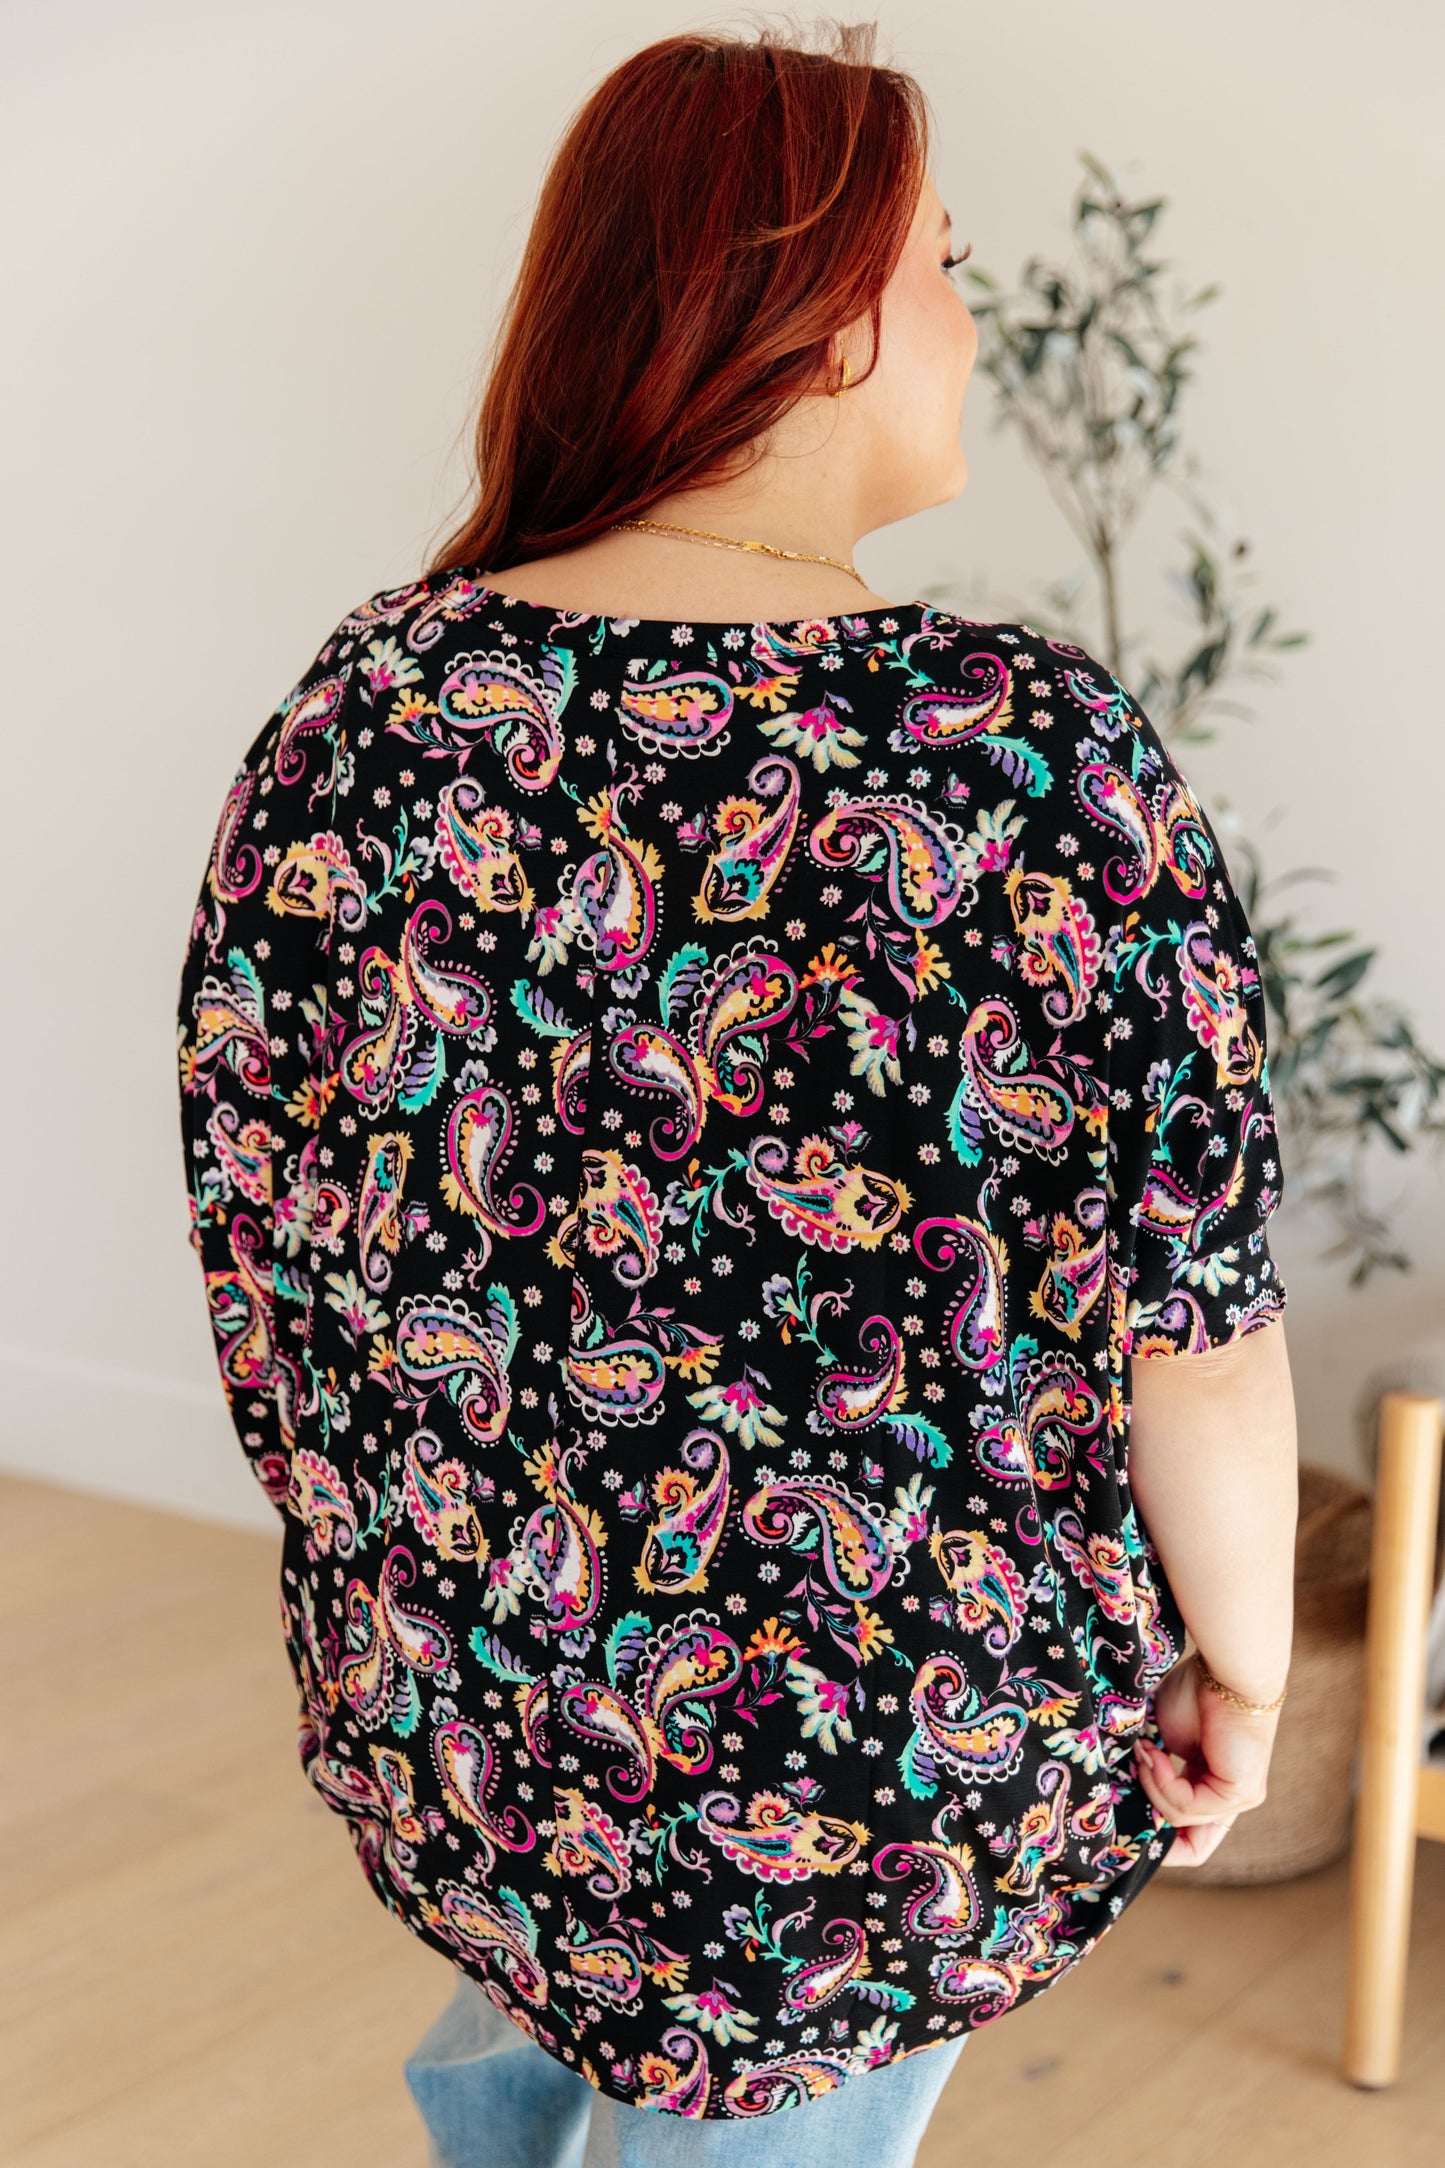 Blouse in Black and Pink Paisley